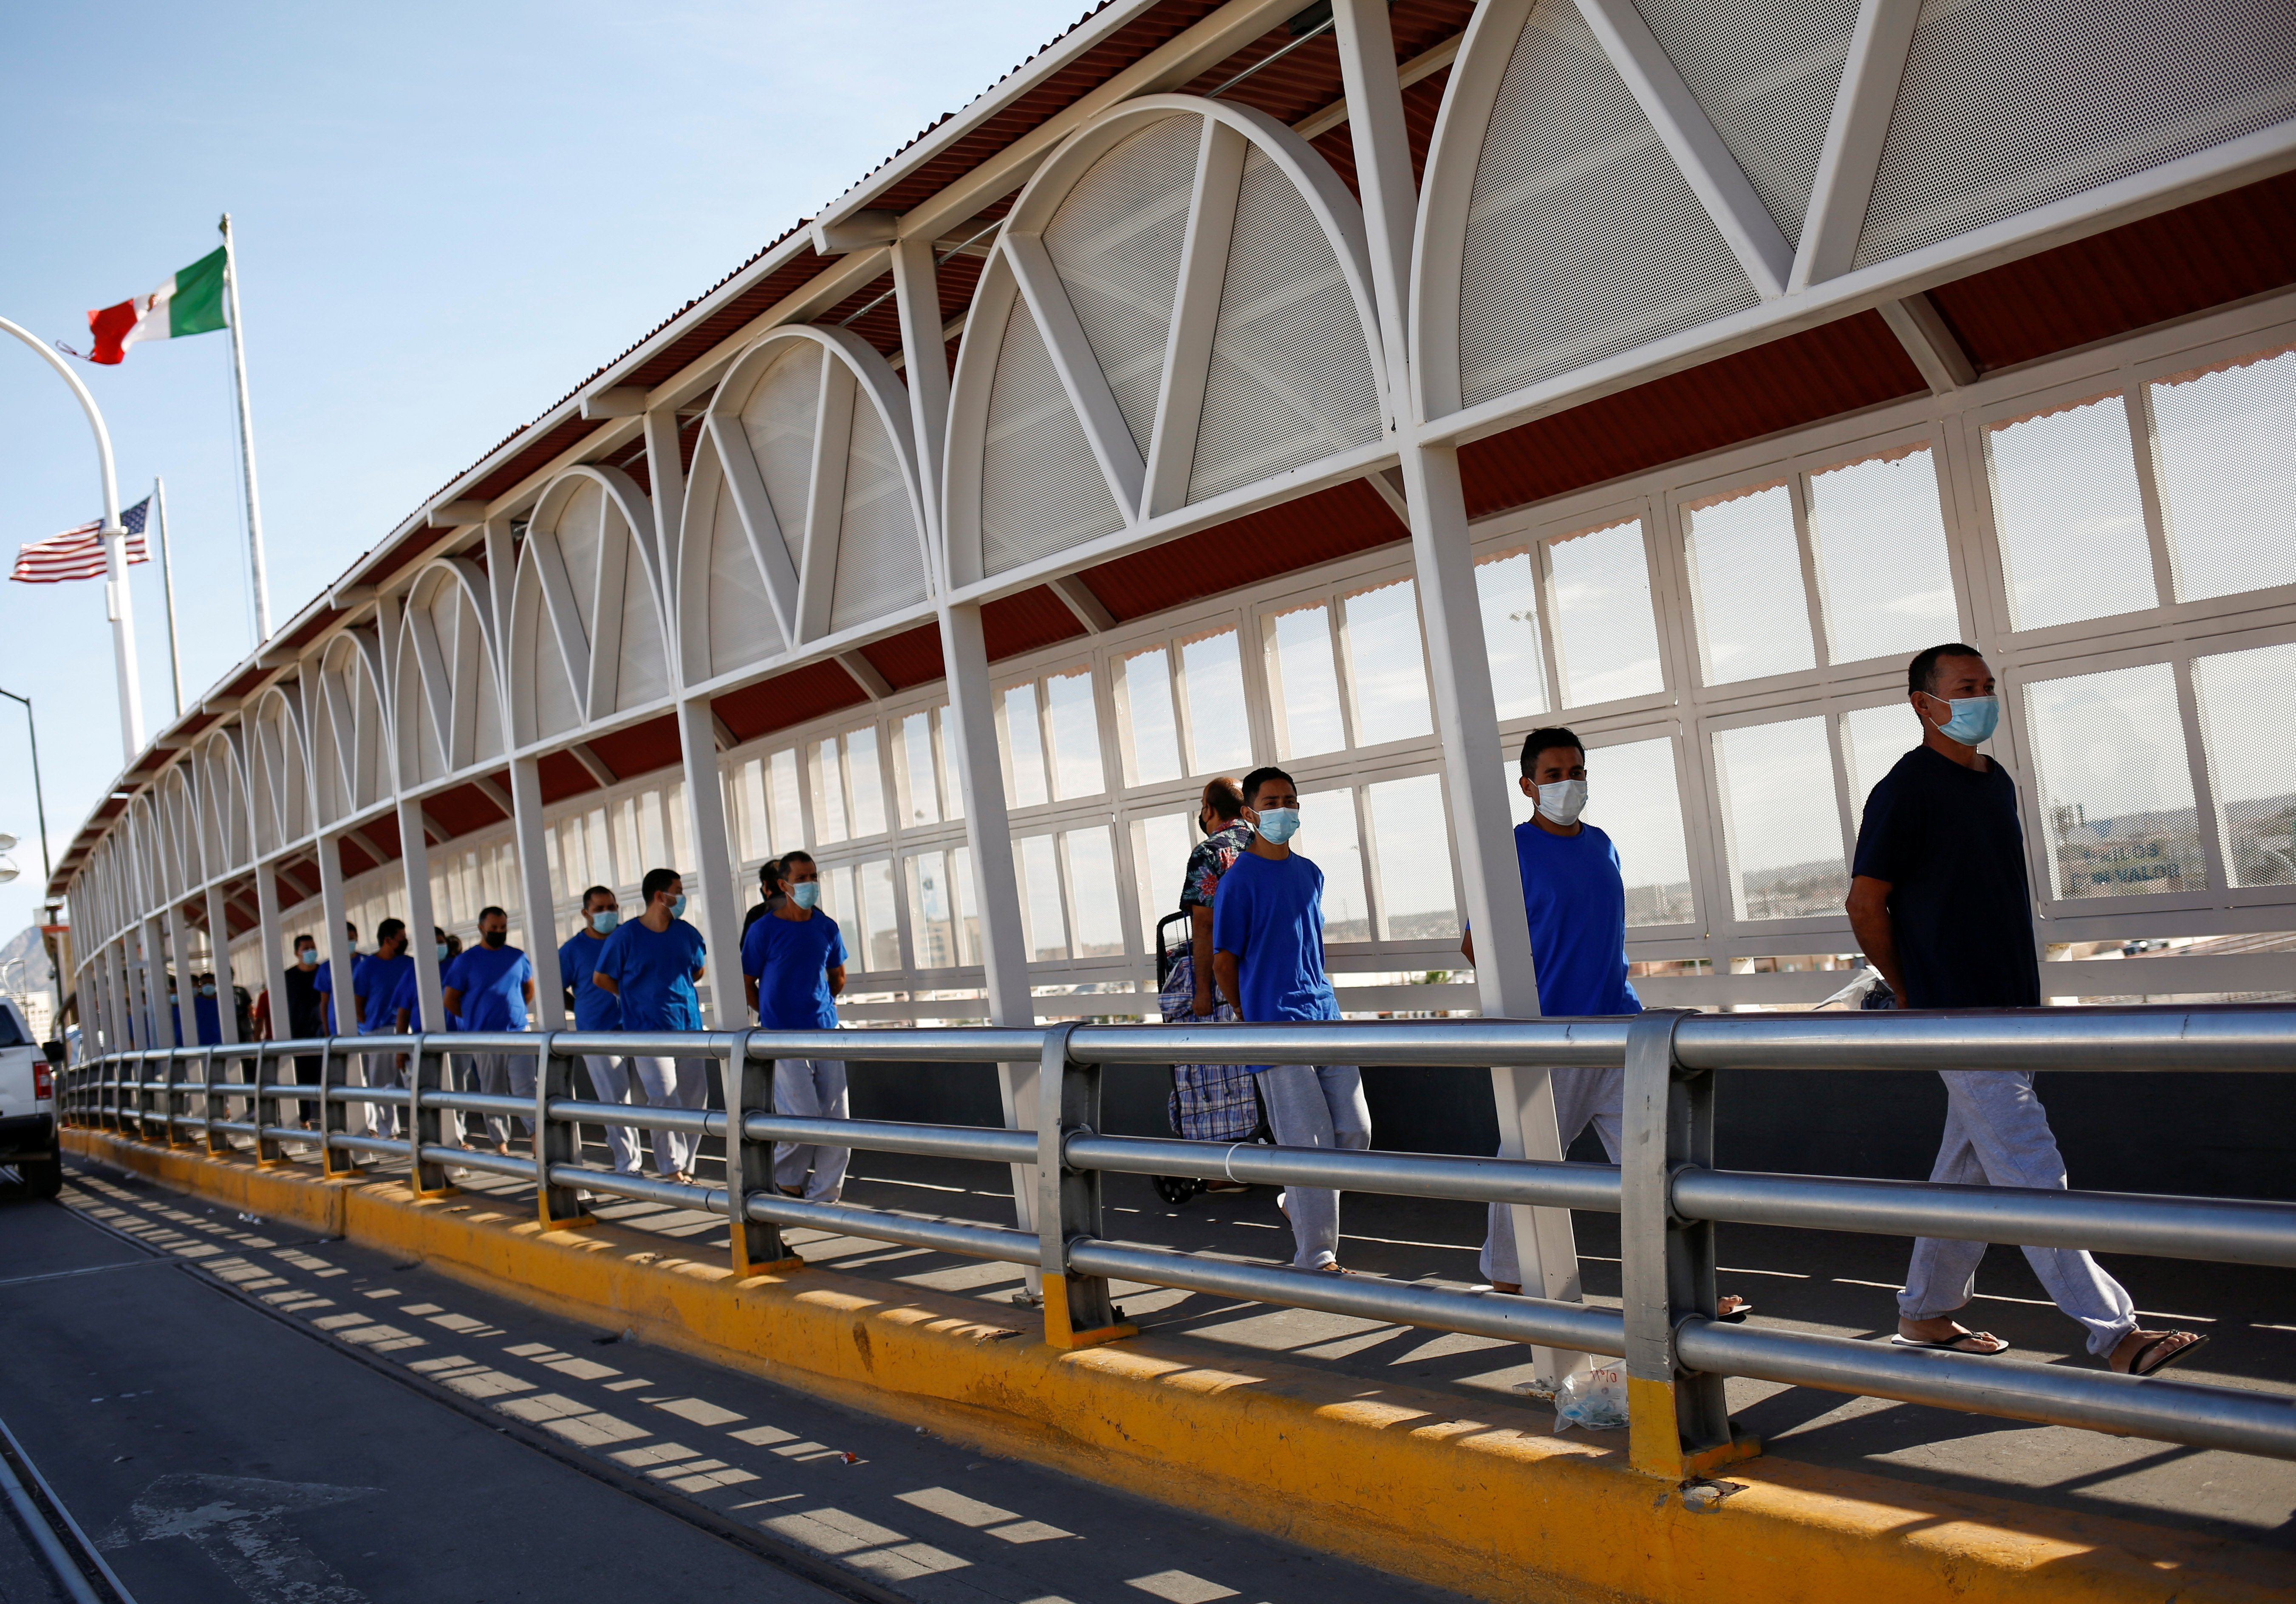 Migrants expelled from the U.S. and sent back to Mexico under Title 42 walk toward Mexico at the Paso del Norte International border bridge, in this picture taken from Ciudad Juarez, Mexico, July 29, 2021. (CNS photo/Jose Luis Gonzalez, Reuters)